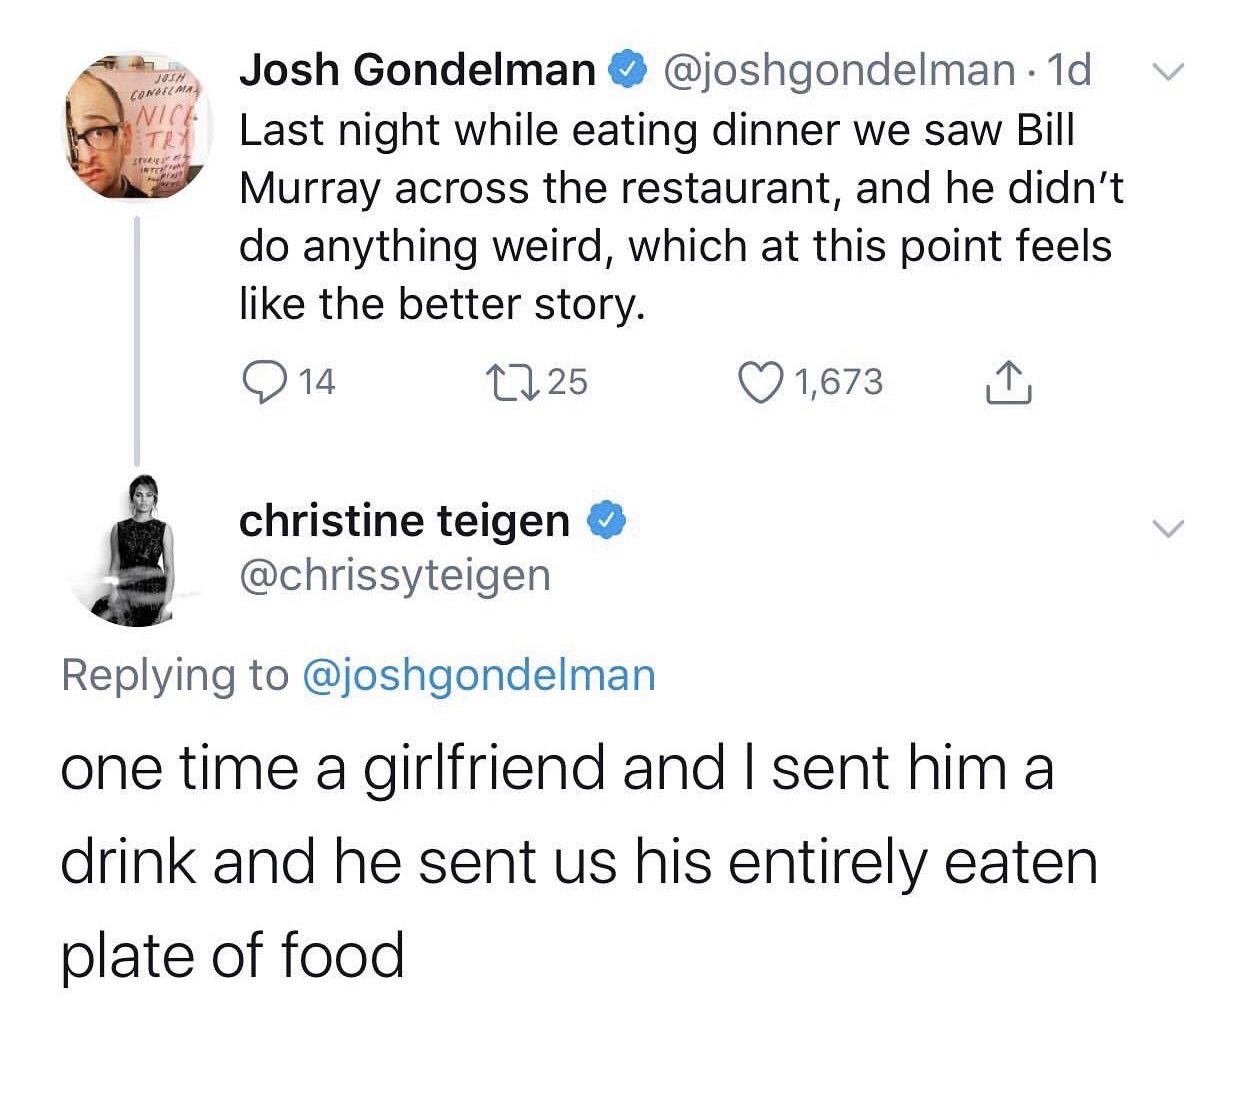 angle - Condima Ni T Tule Josh Gondelman .1d Last night while eating dinner we saw Bill Murray across the restaurant, and he didn't do anything weird, which at this point feels the better story. 2 14 1725 1,673 1 christine teigen one time a girlfriend and